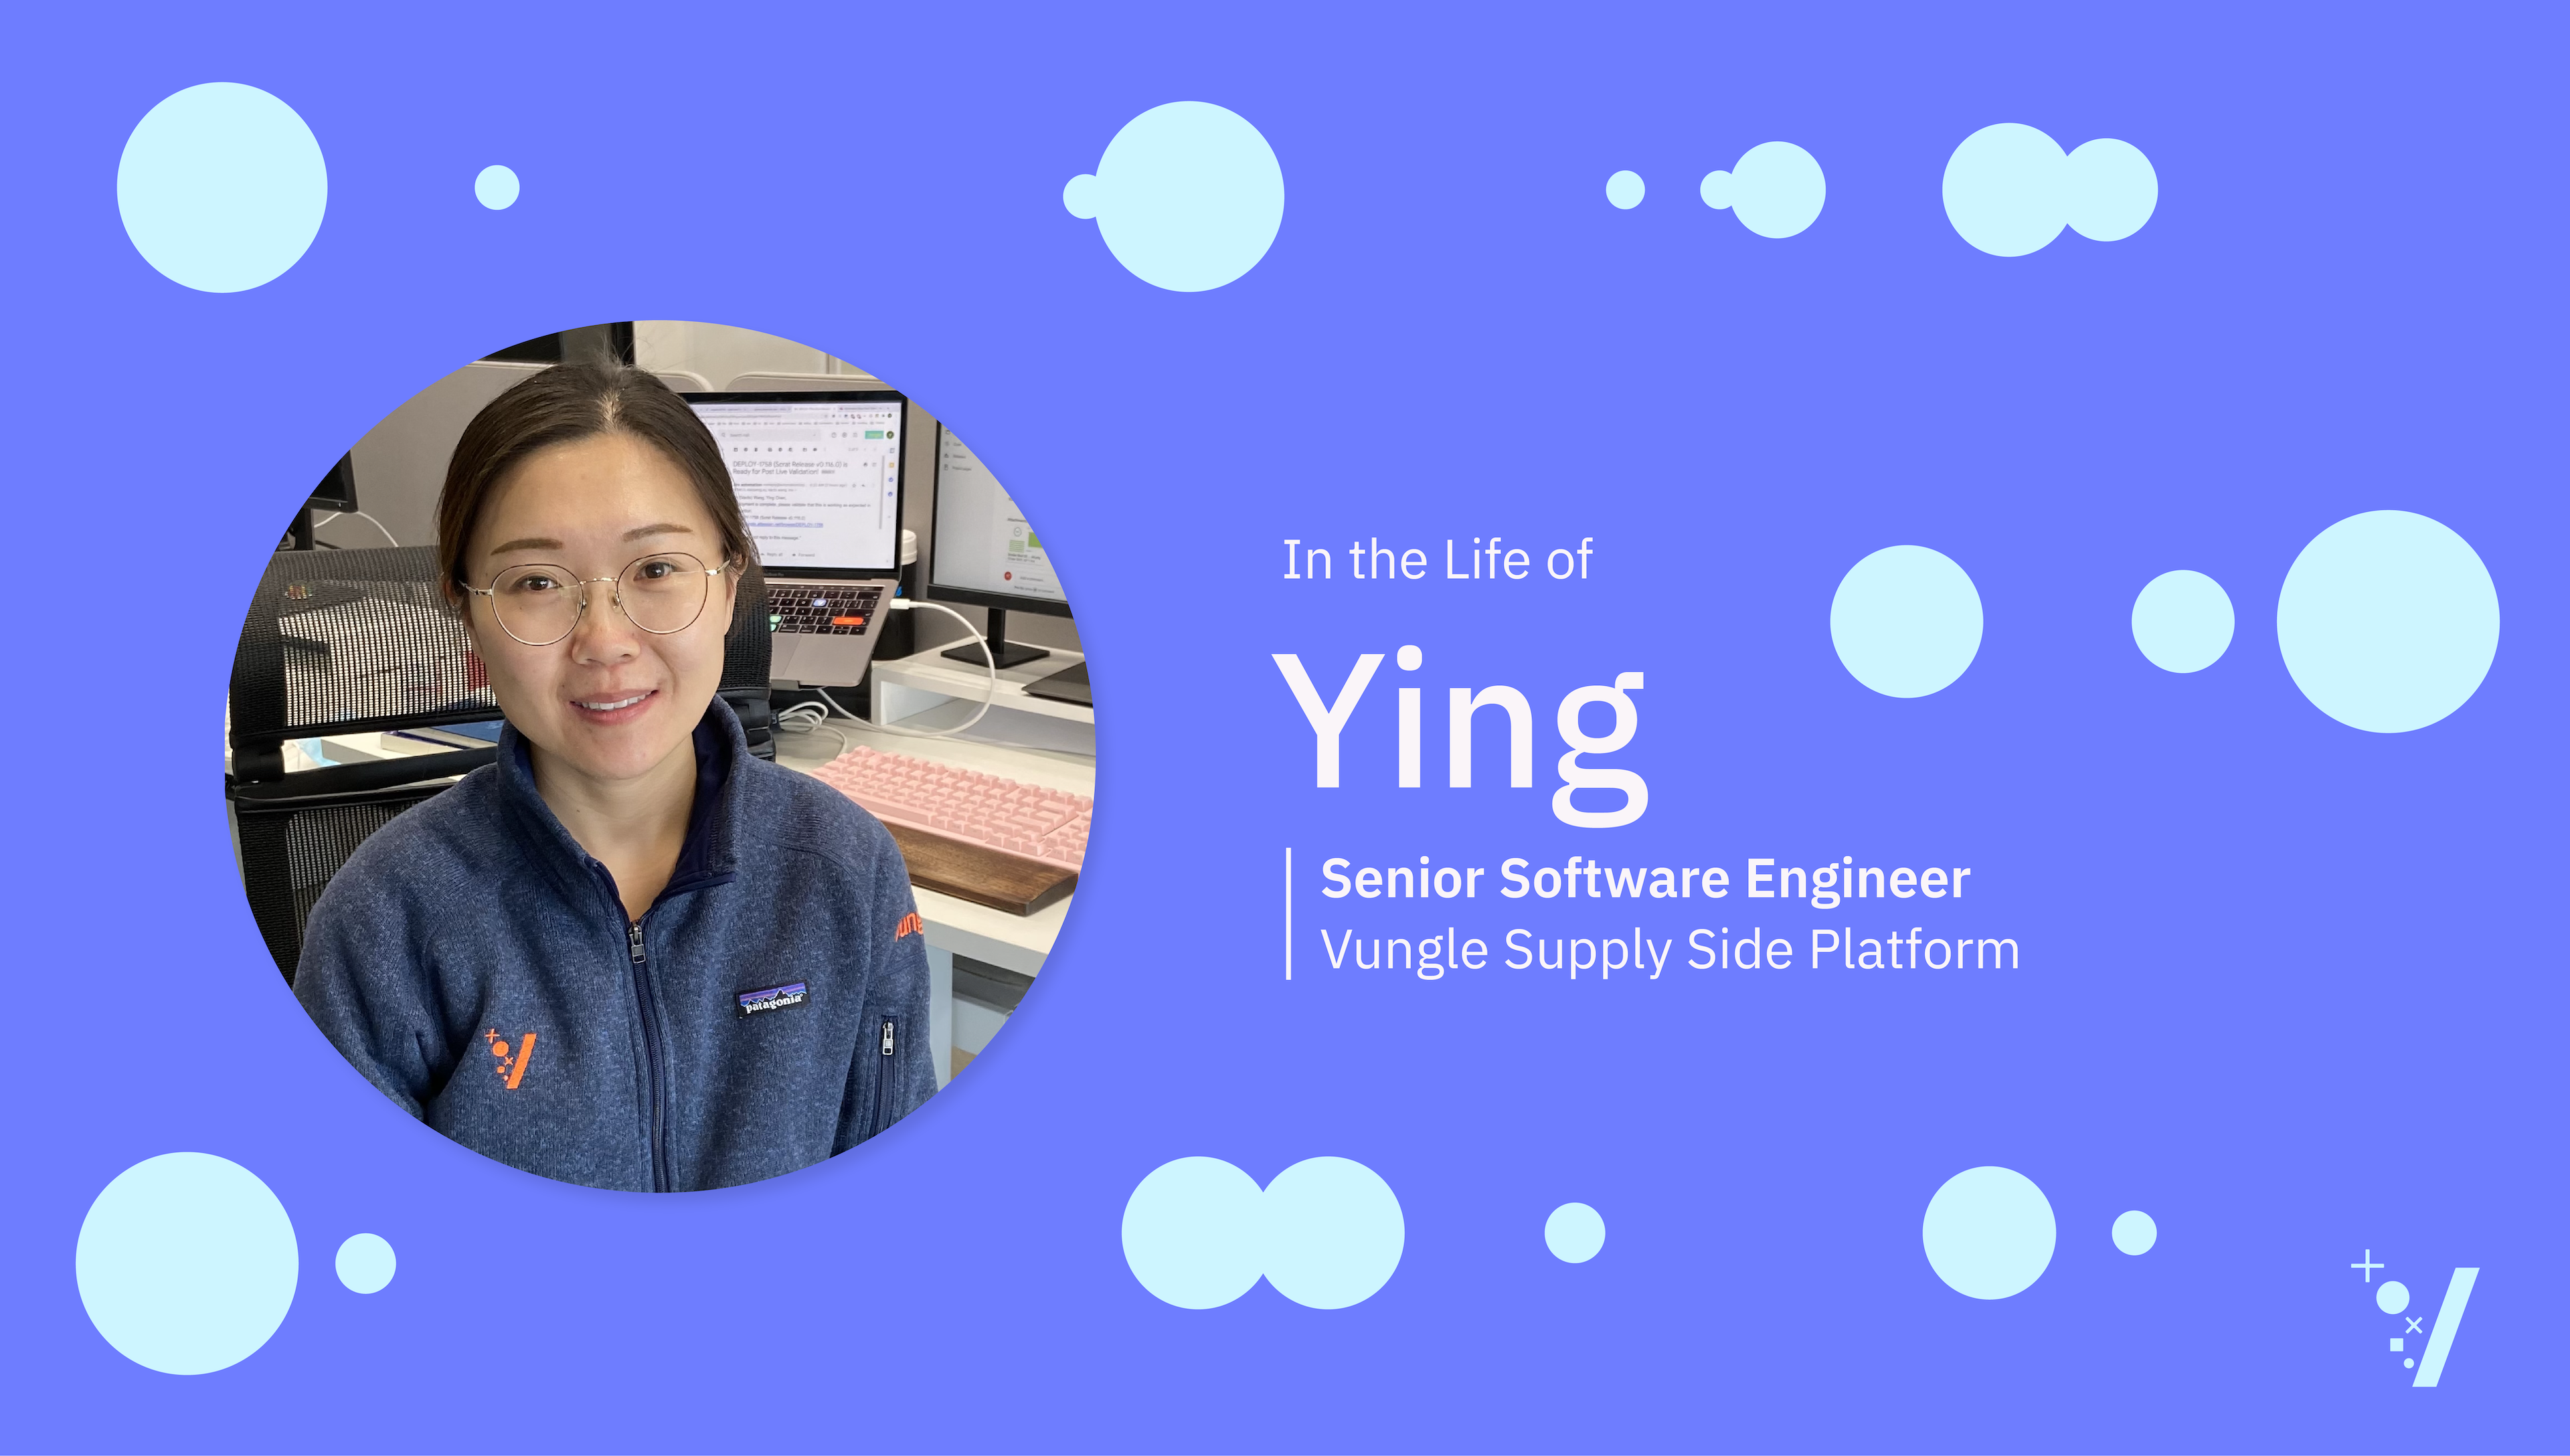 Life of a Senior Software Engineer (Platform) With Ying